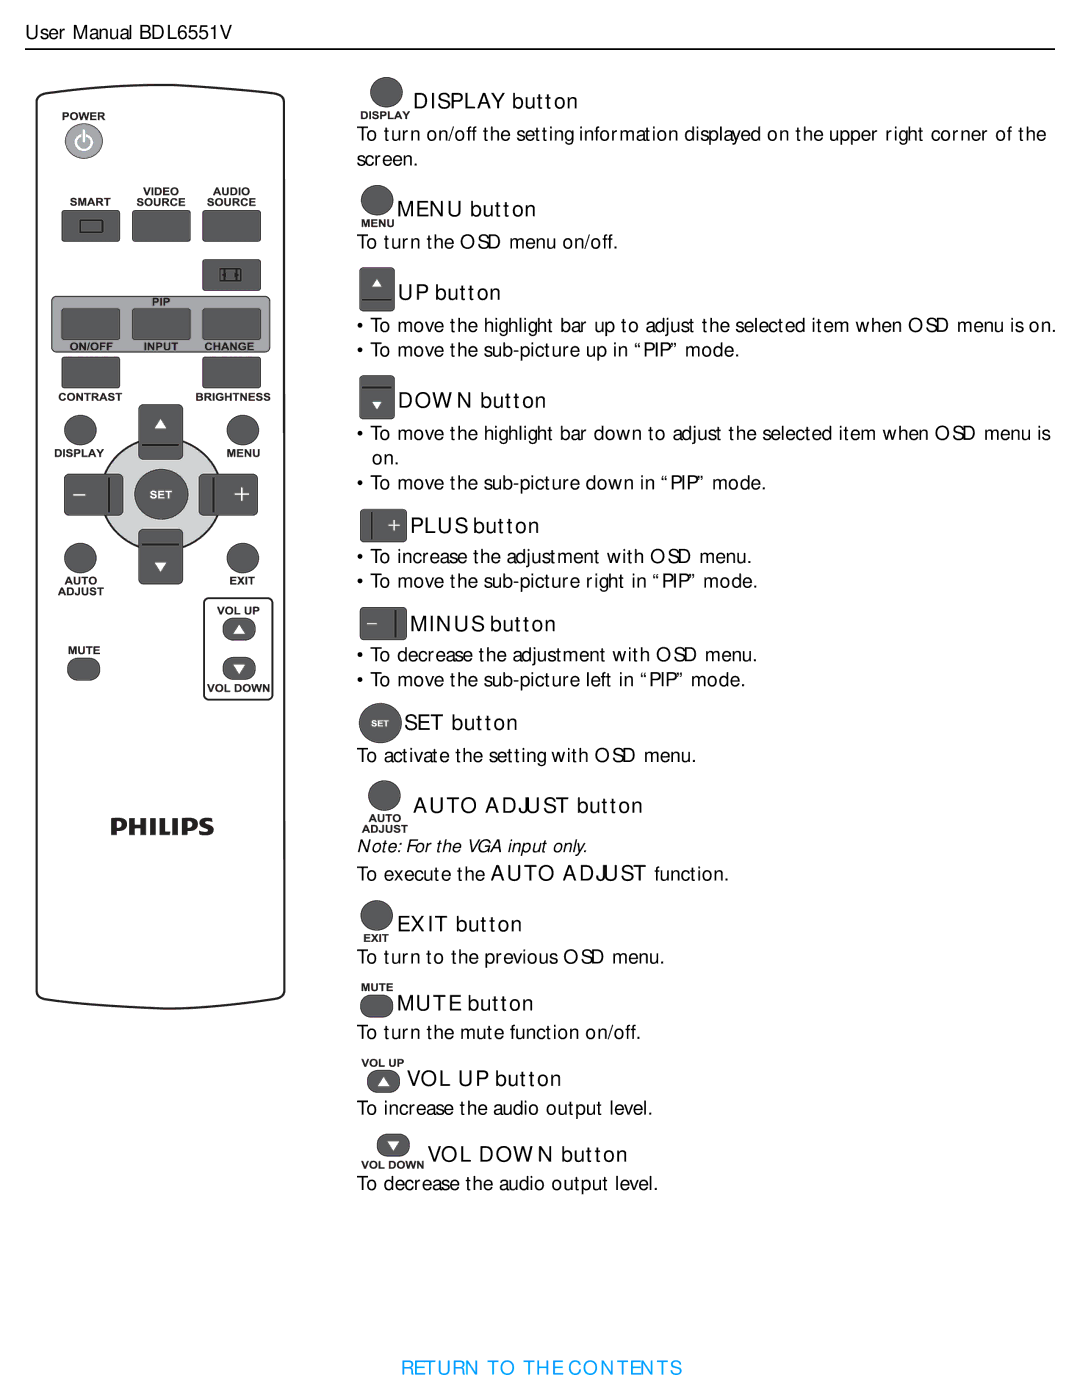 Philips BDL6551V Display button, UP button, Down button, Plus button, Minus button, SET button, Auto Adjust button 